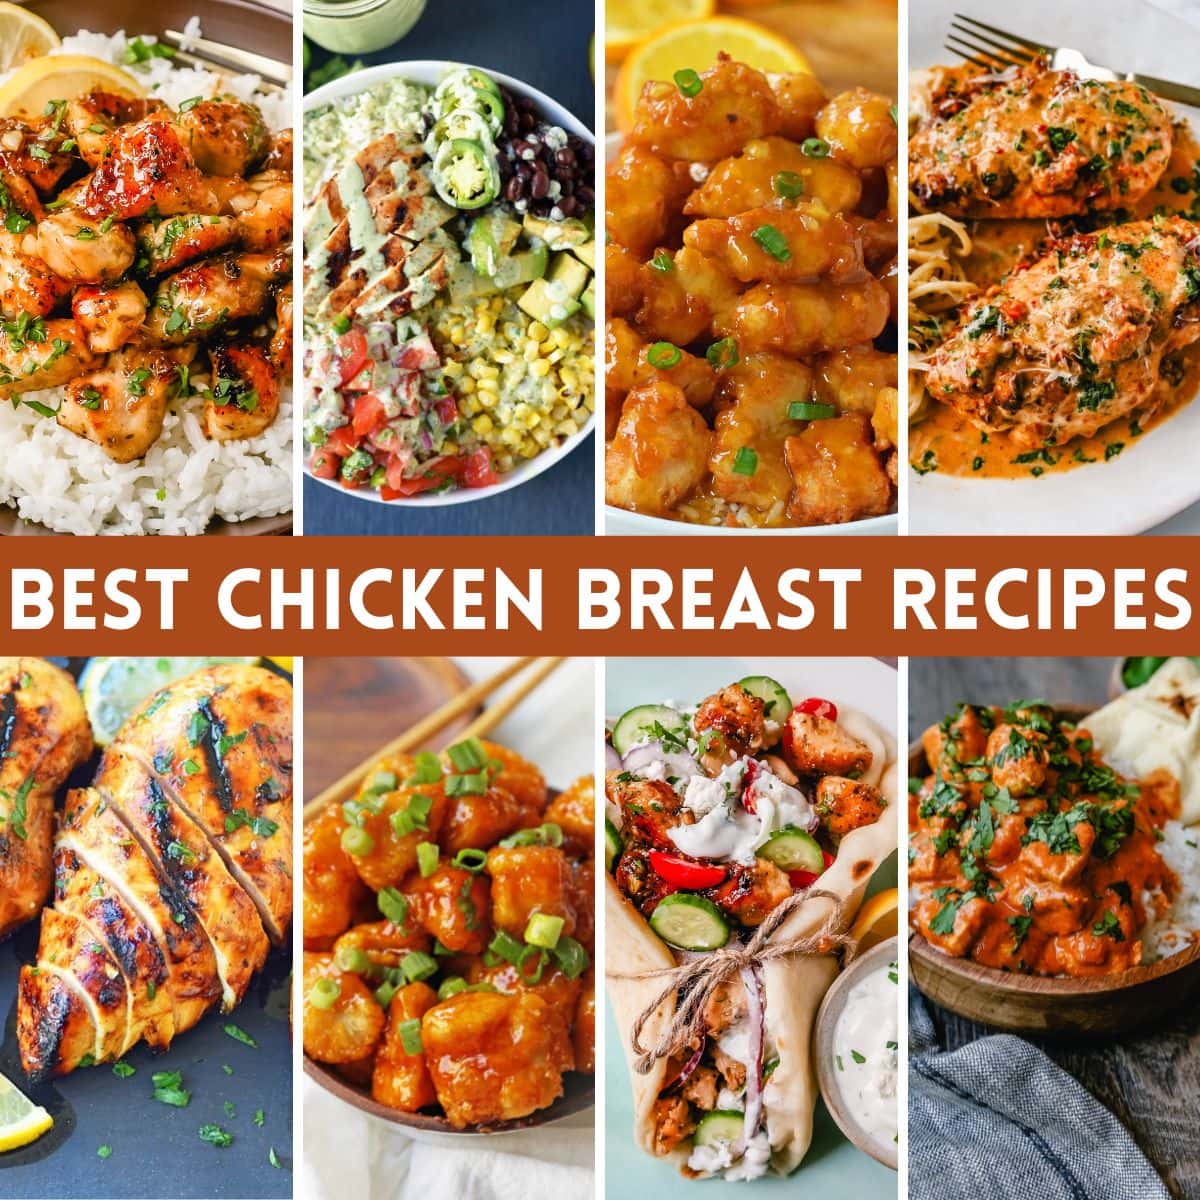 The Best Chicken Recipes. Recipes to make using chicken breast. 50 Chicken Breast Recipes.